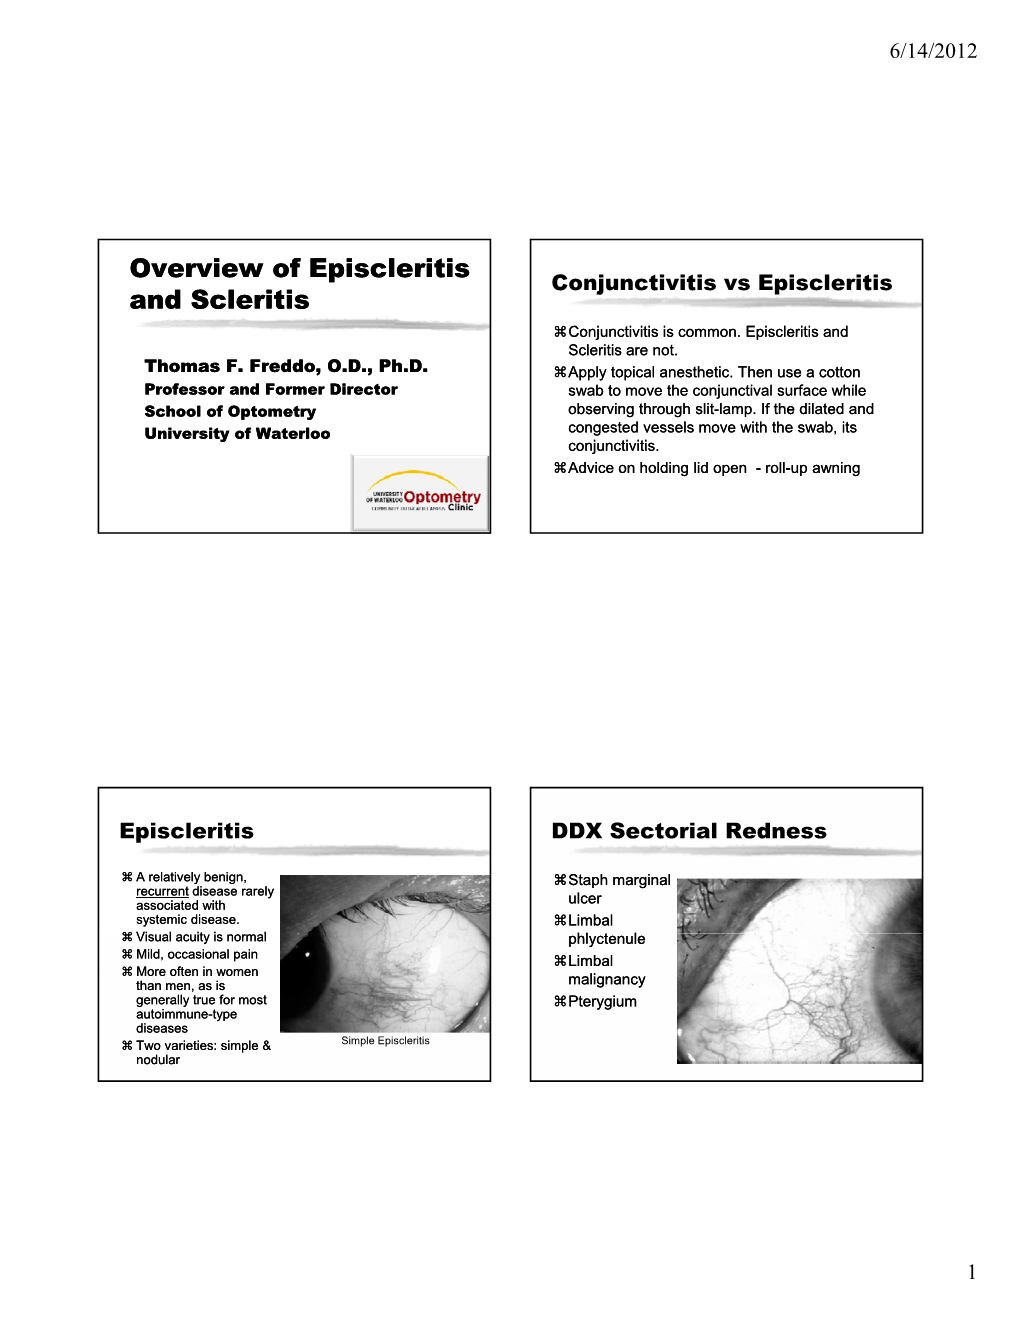 Overview of Overview of Episcleritis Episcleritis and Scleritis Scleritis